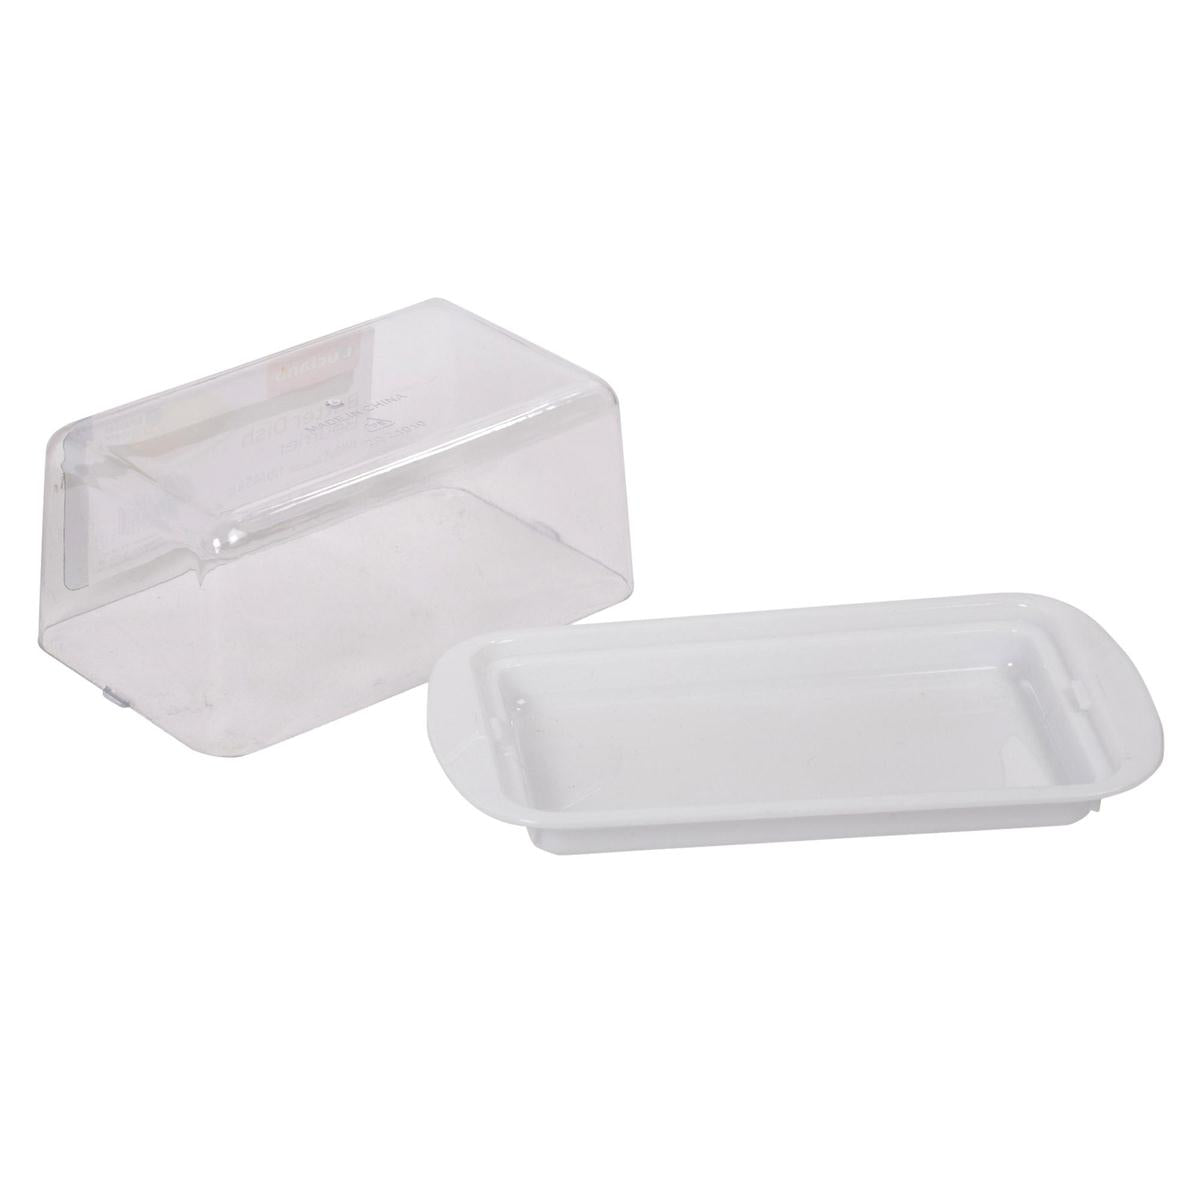 Luciano Butter Dish, 1-lb (454g) Capacity, Dimensions 5.5x3.5x2.5"